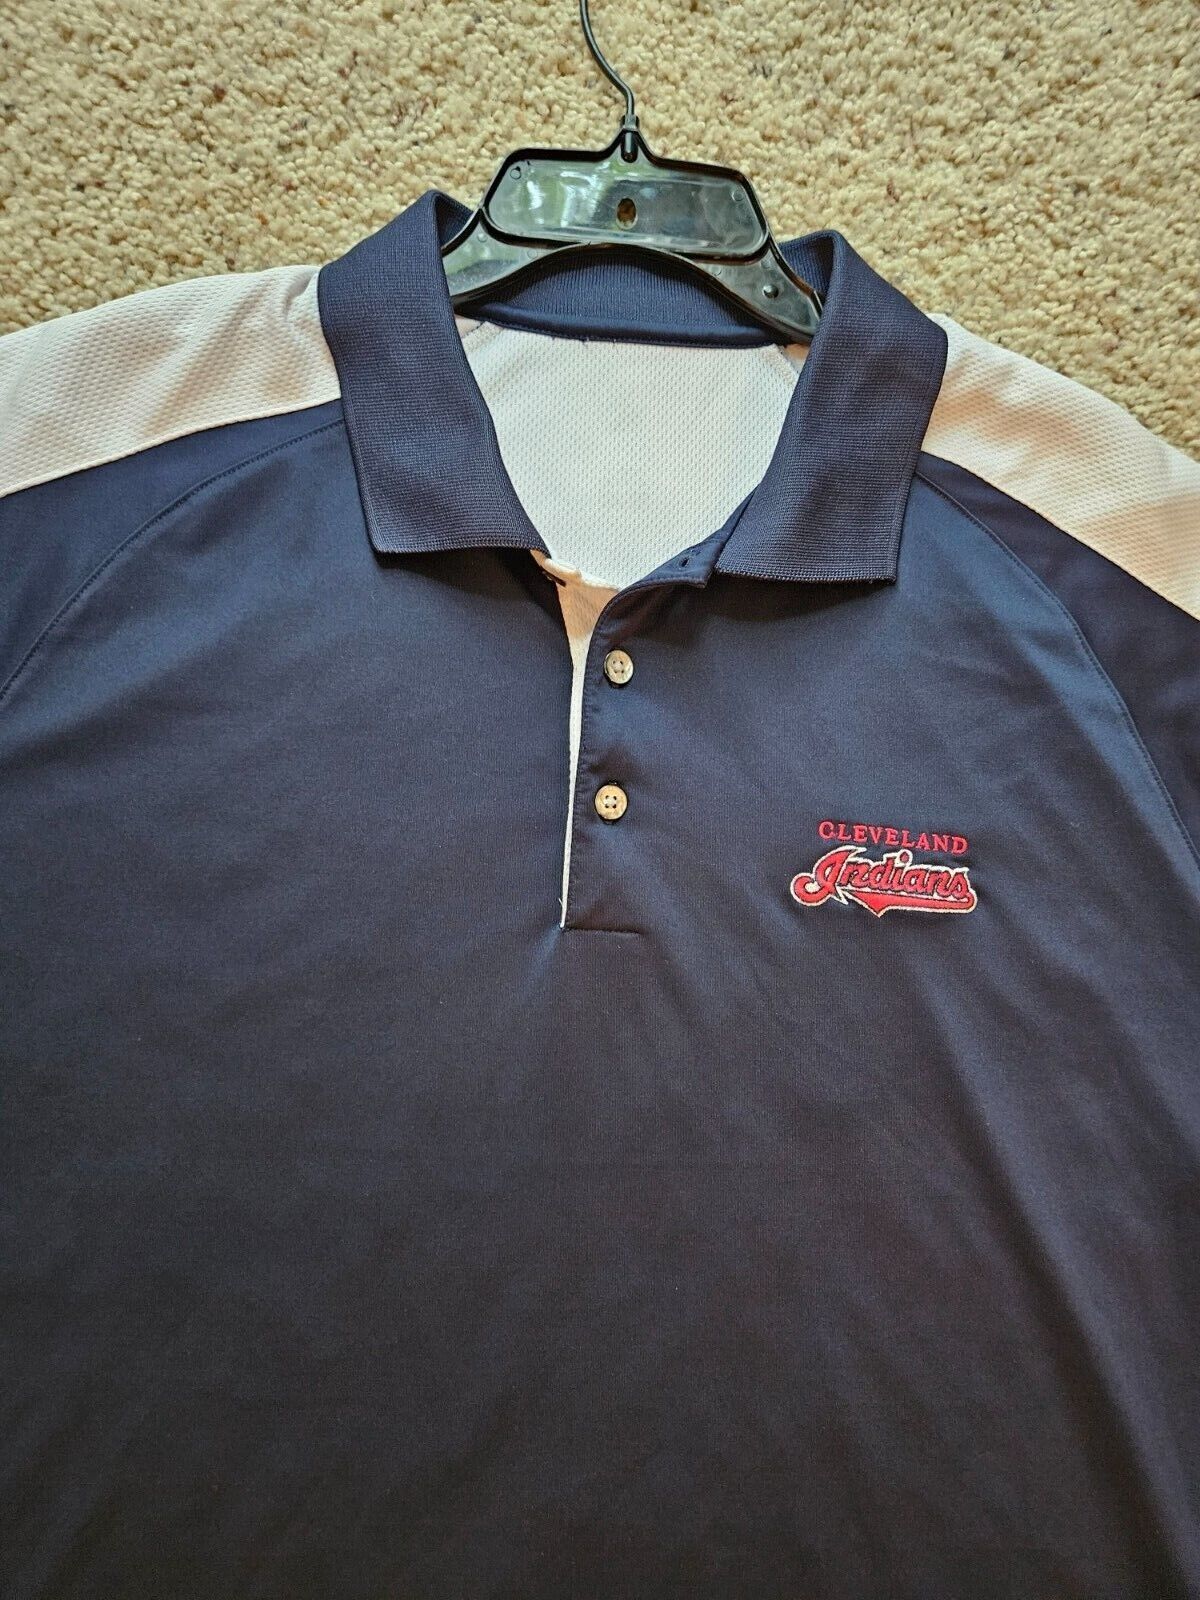 Cleveland Indians Blue with White Sleeves Polo Jersey Size XL